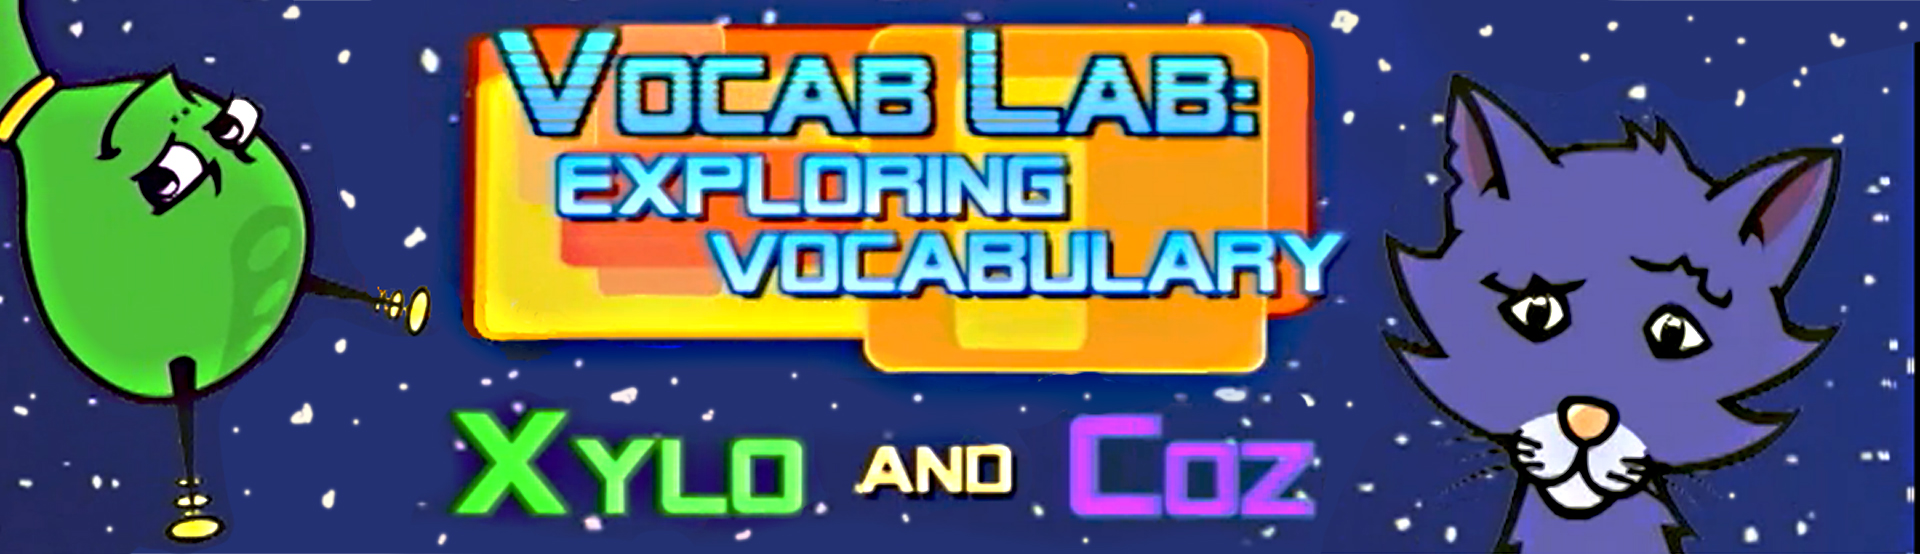 Vocab Lab: Exploring Vocabulary with Xylo and Coz